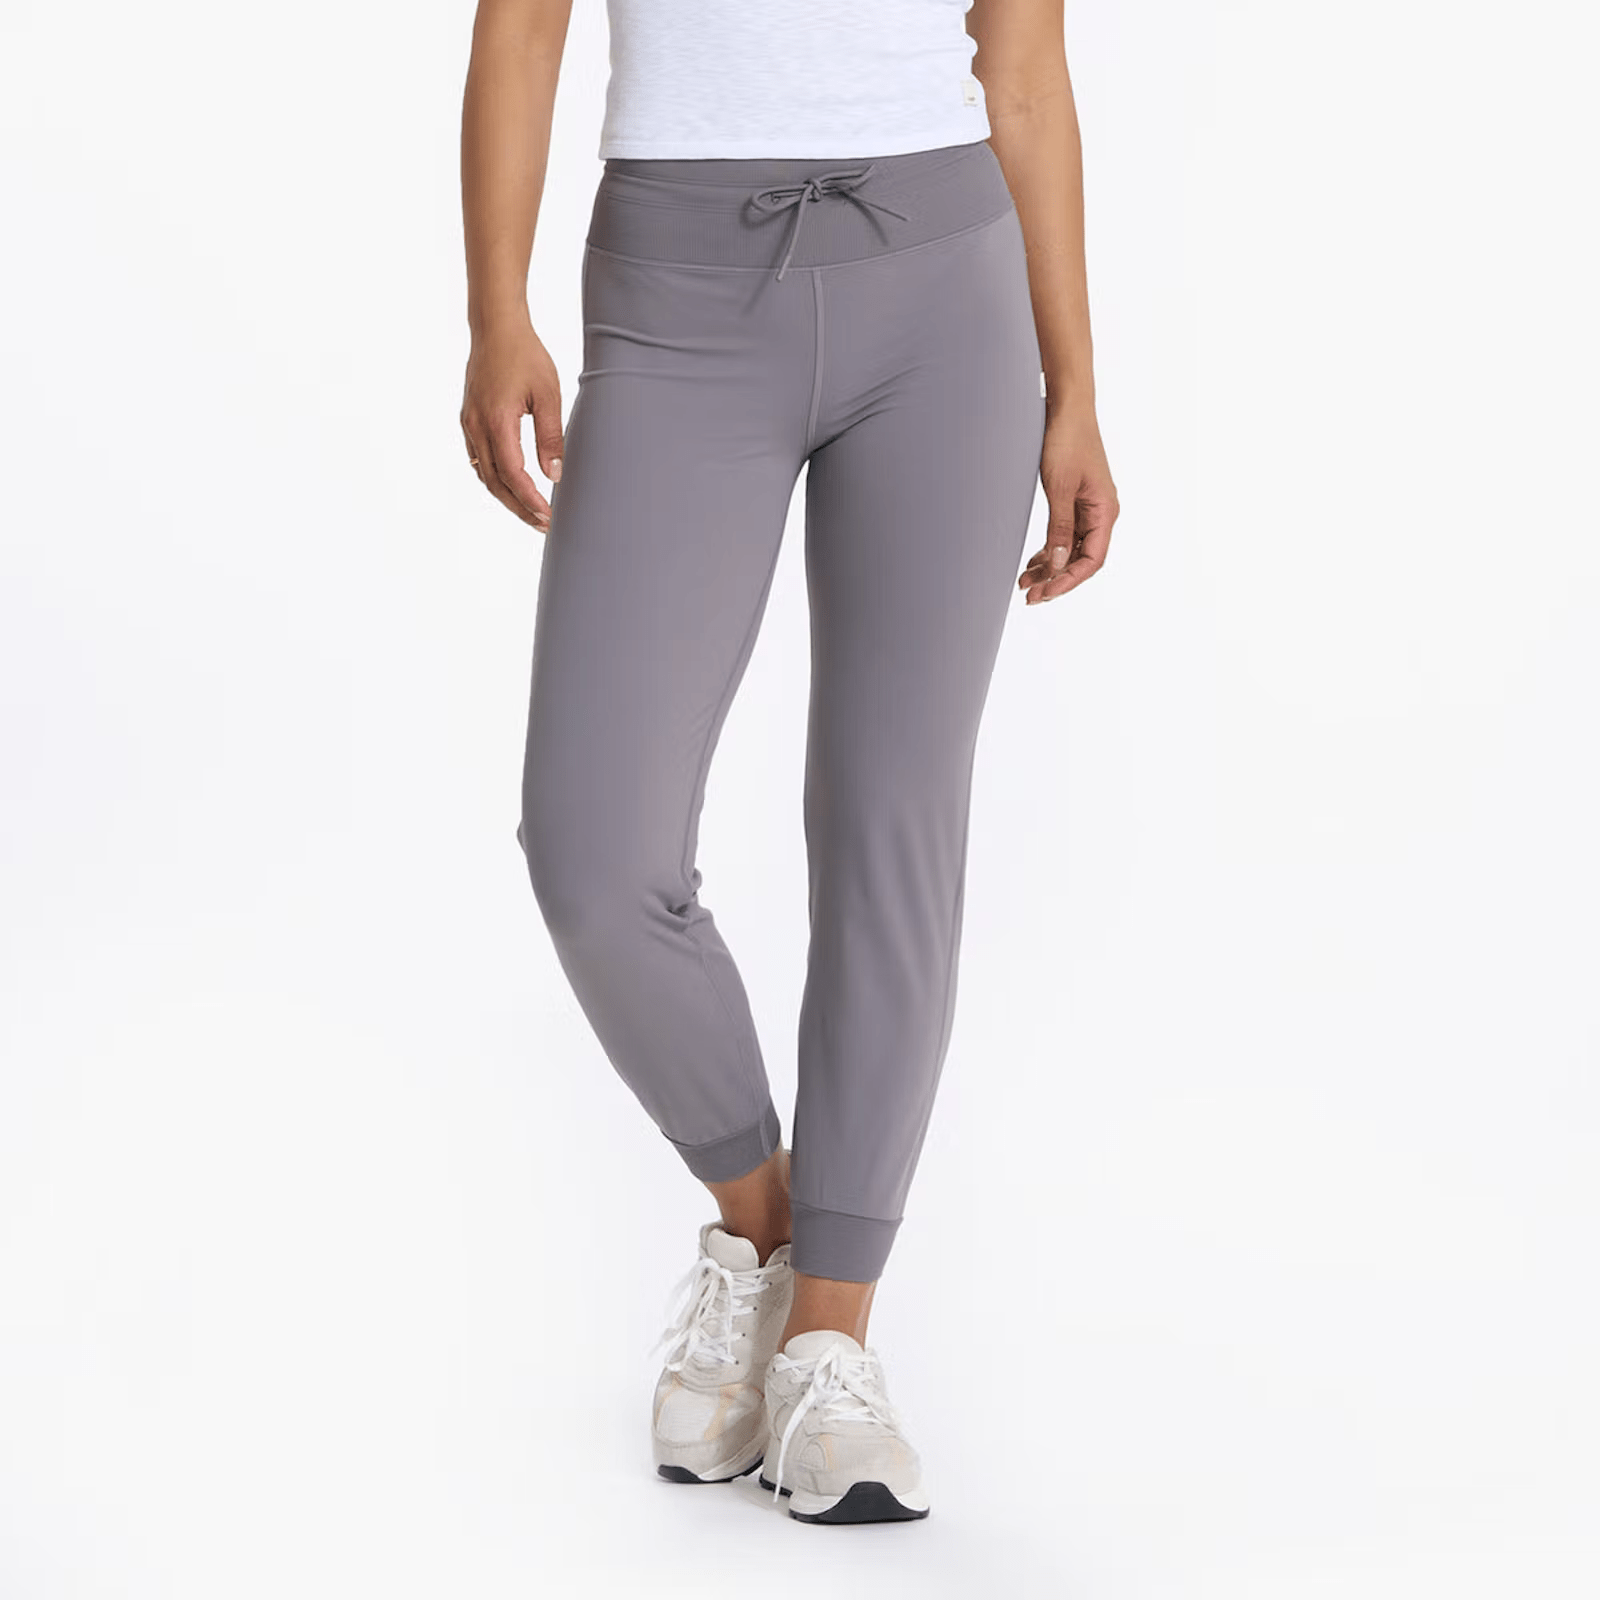 vuori daily jogger pants as a work from home gift in a dark gray color